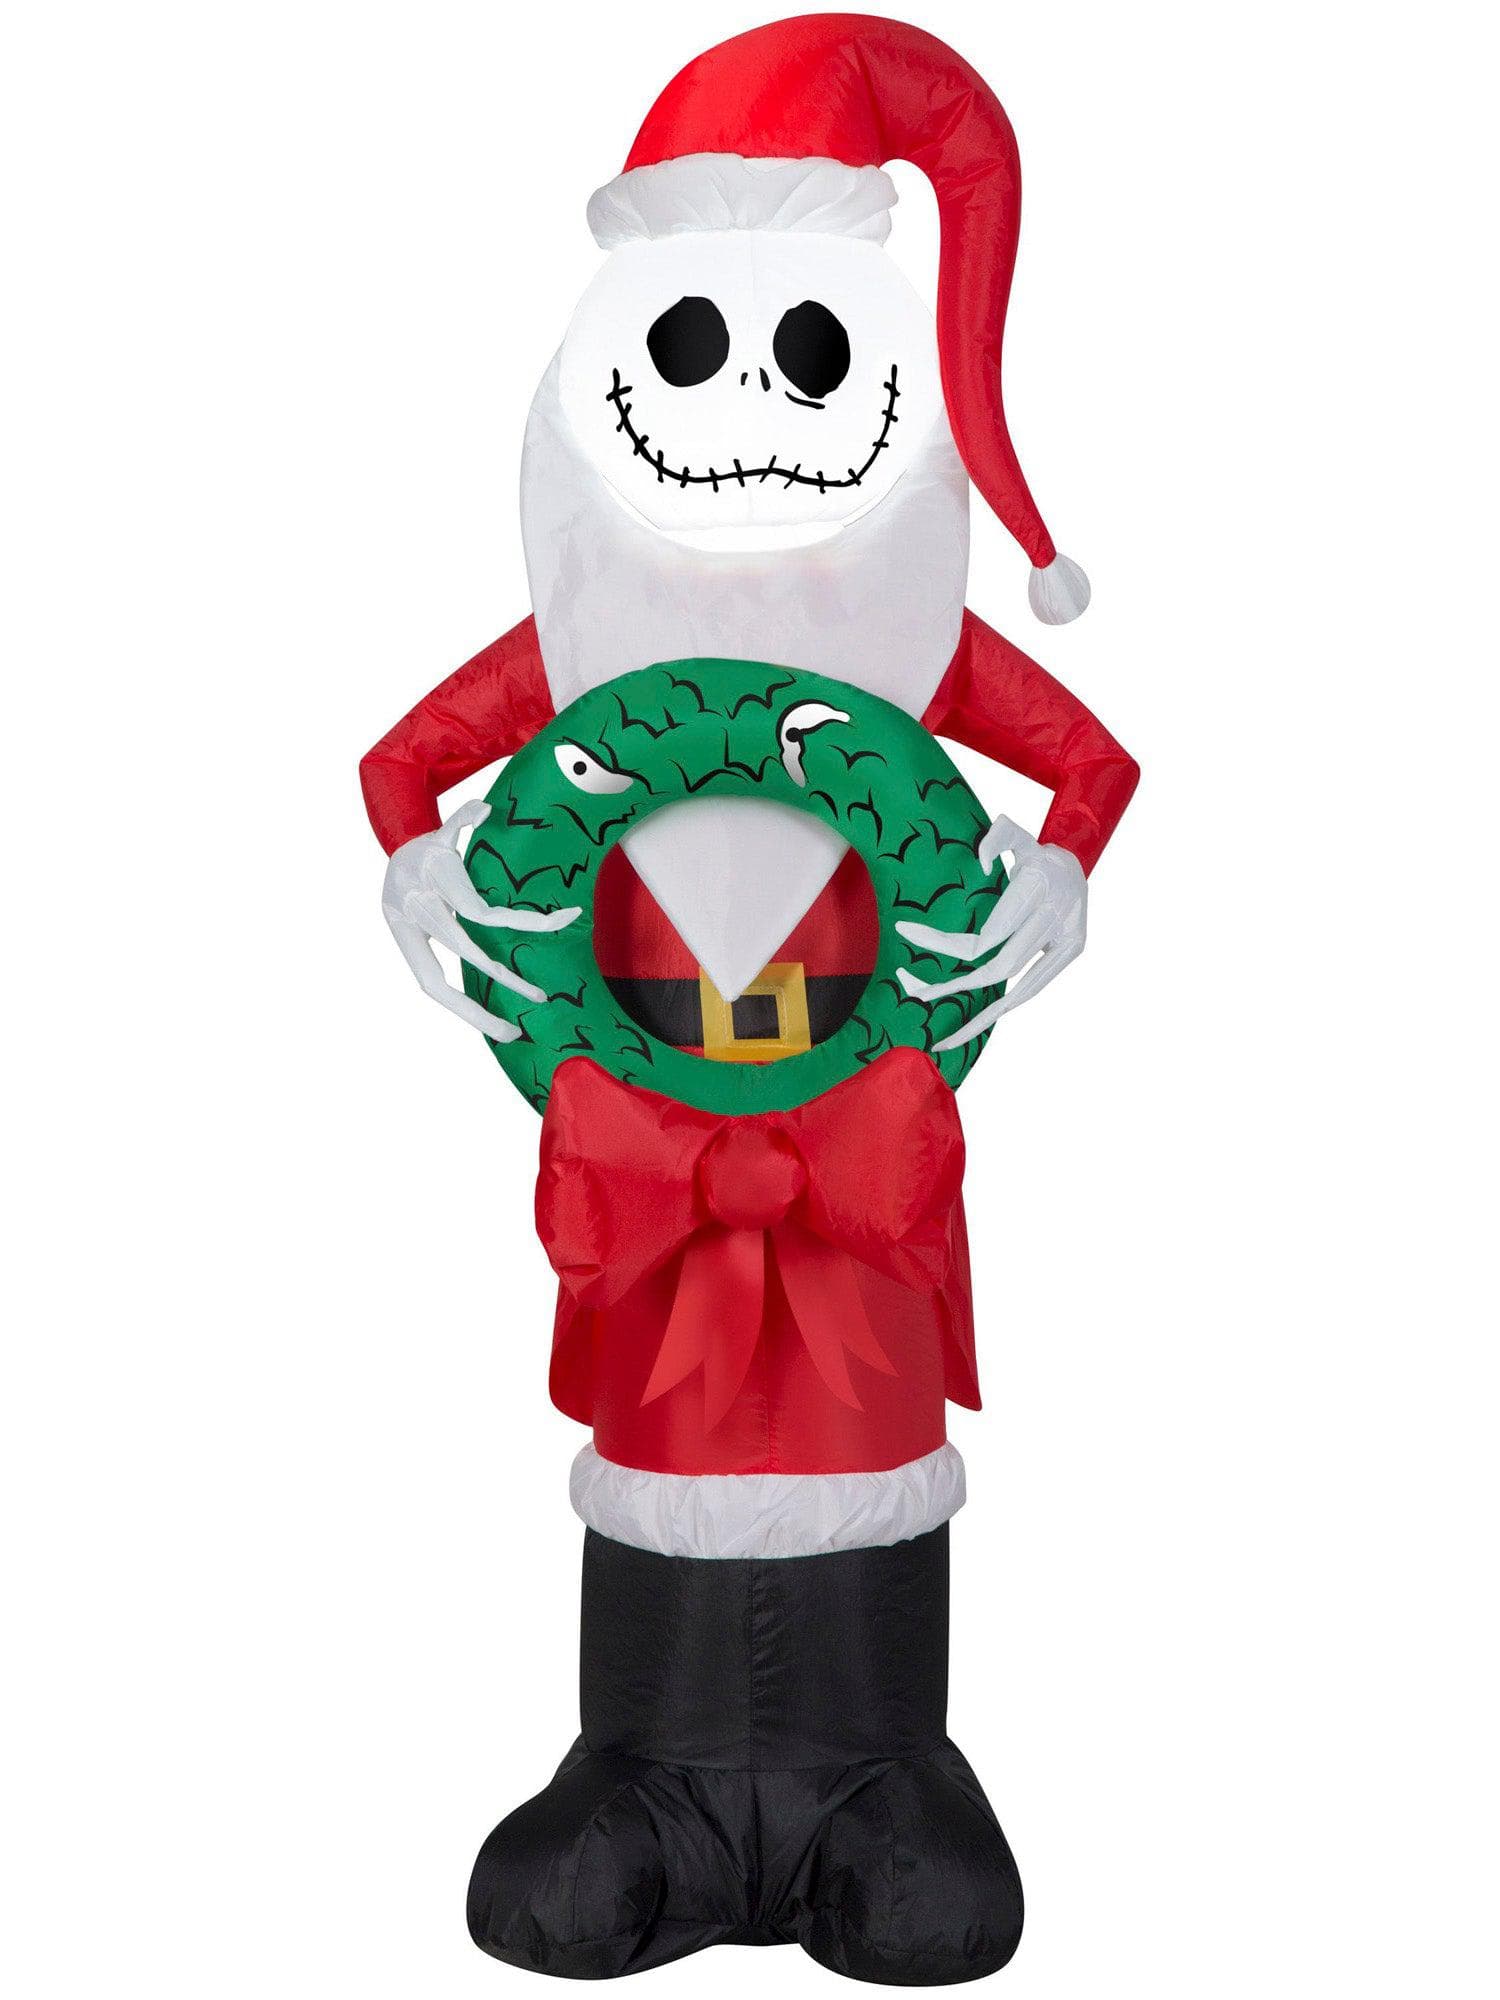 4 Foot The Nightmare Before Christmas Jack Skellington's Wreath Light Up Christmas Inflatable Lawn Decor - costumes.com